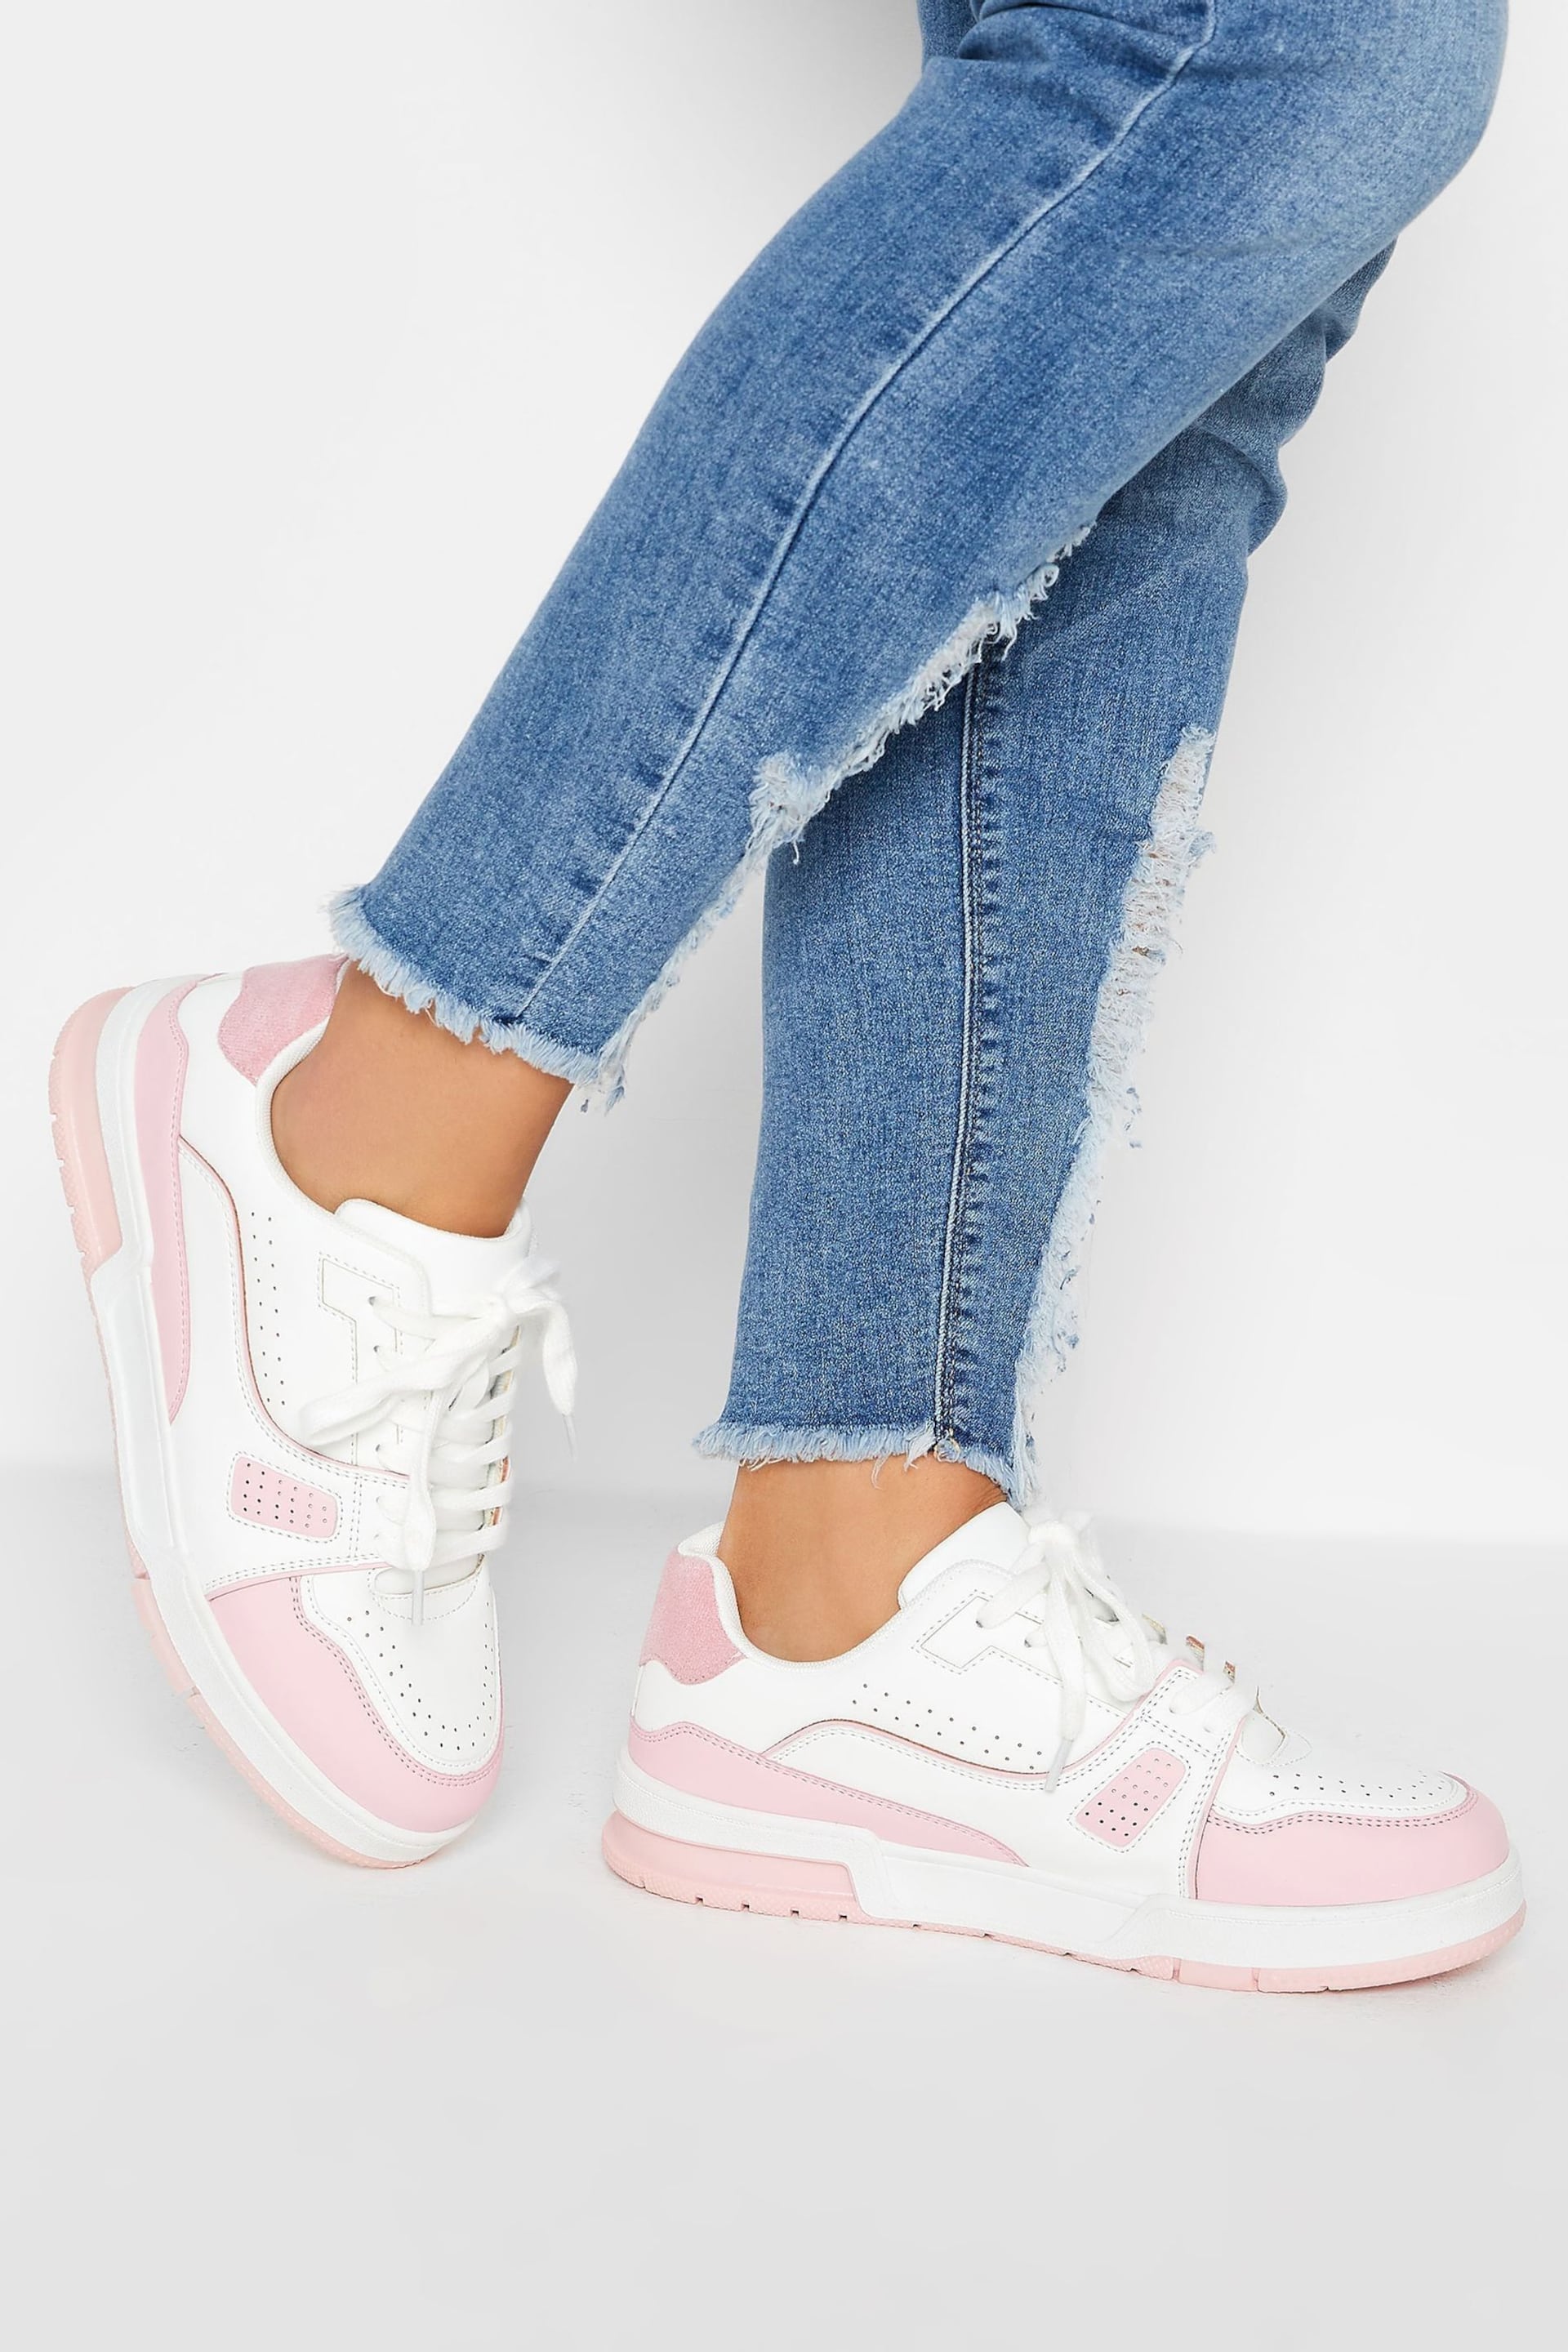 Yours Curve Pink Extra-Wide Fit Colour Block Trainer - Image 1 of 5